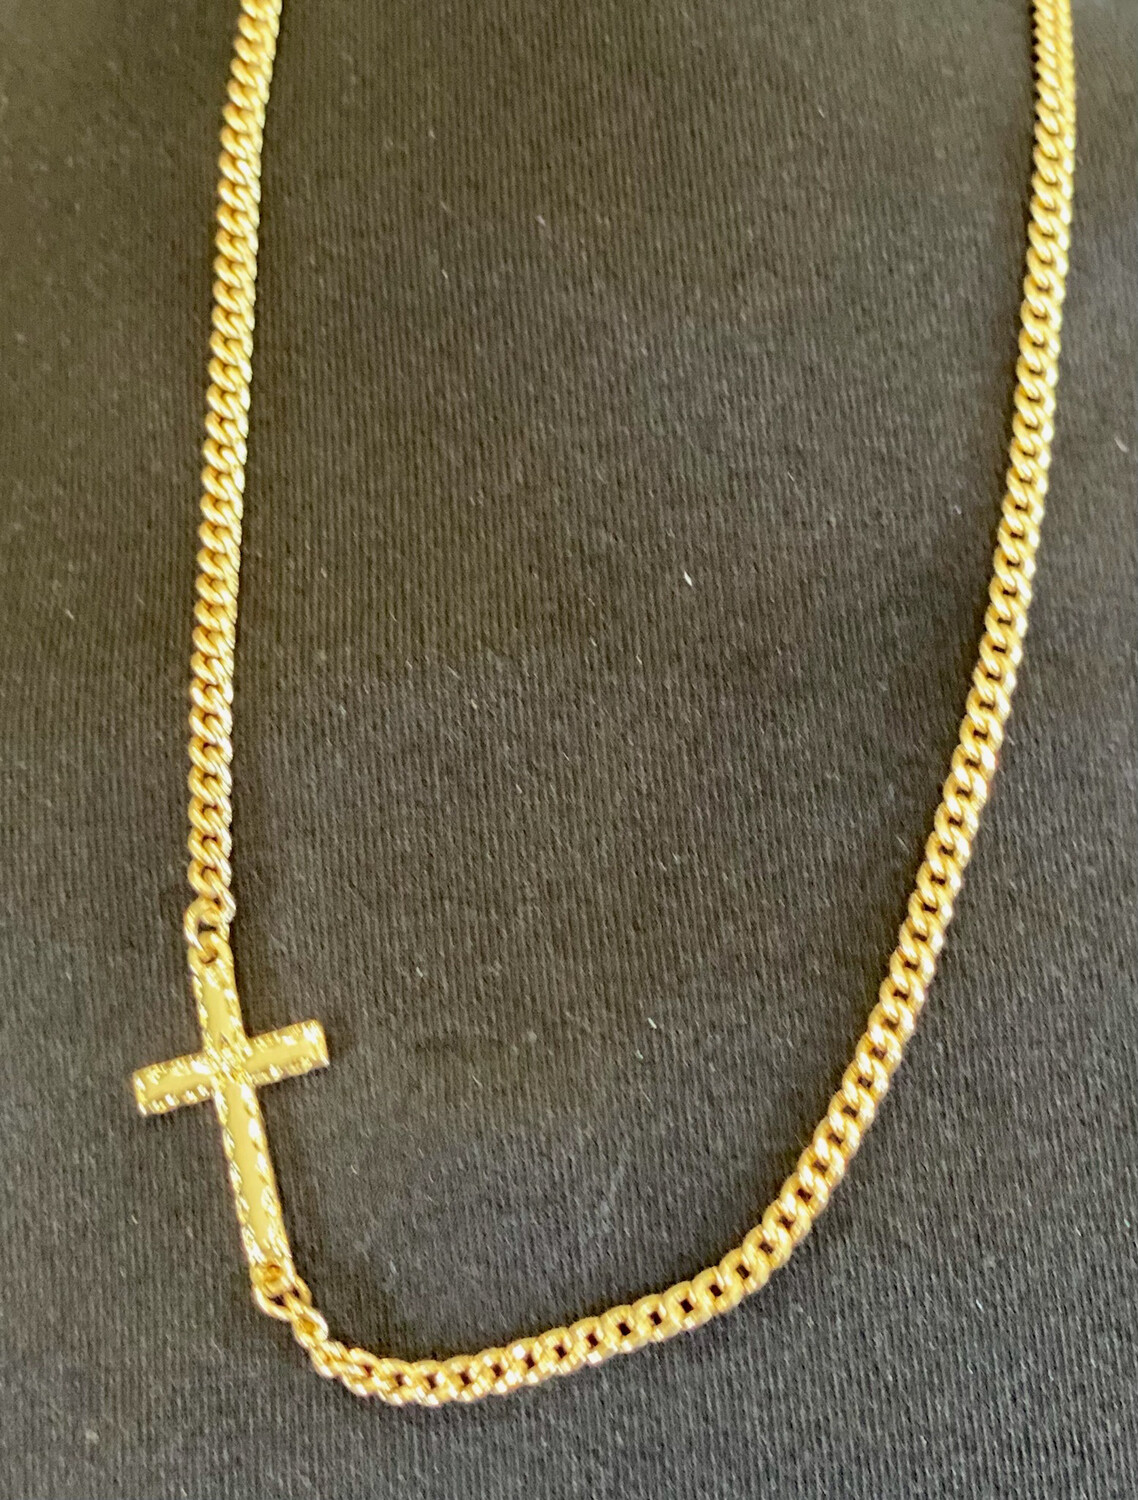 The Cross Necklace 